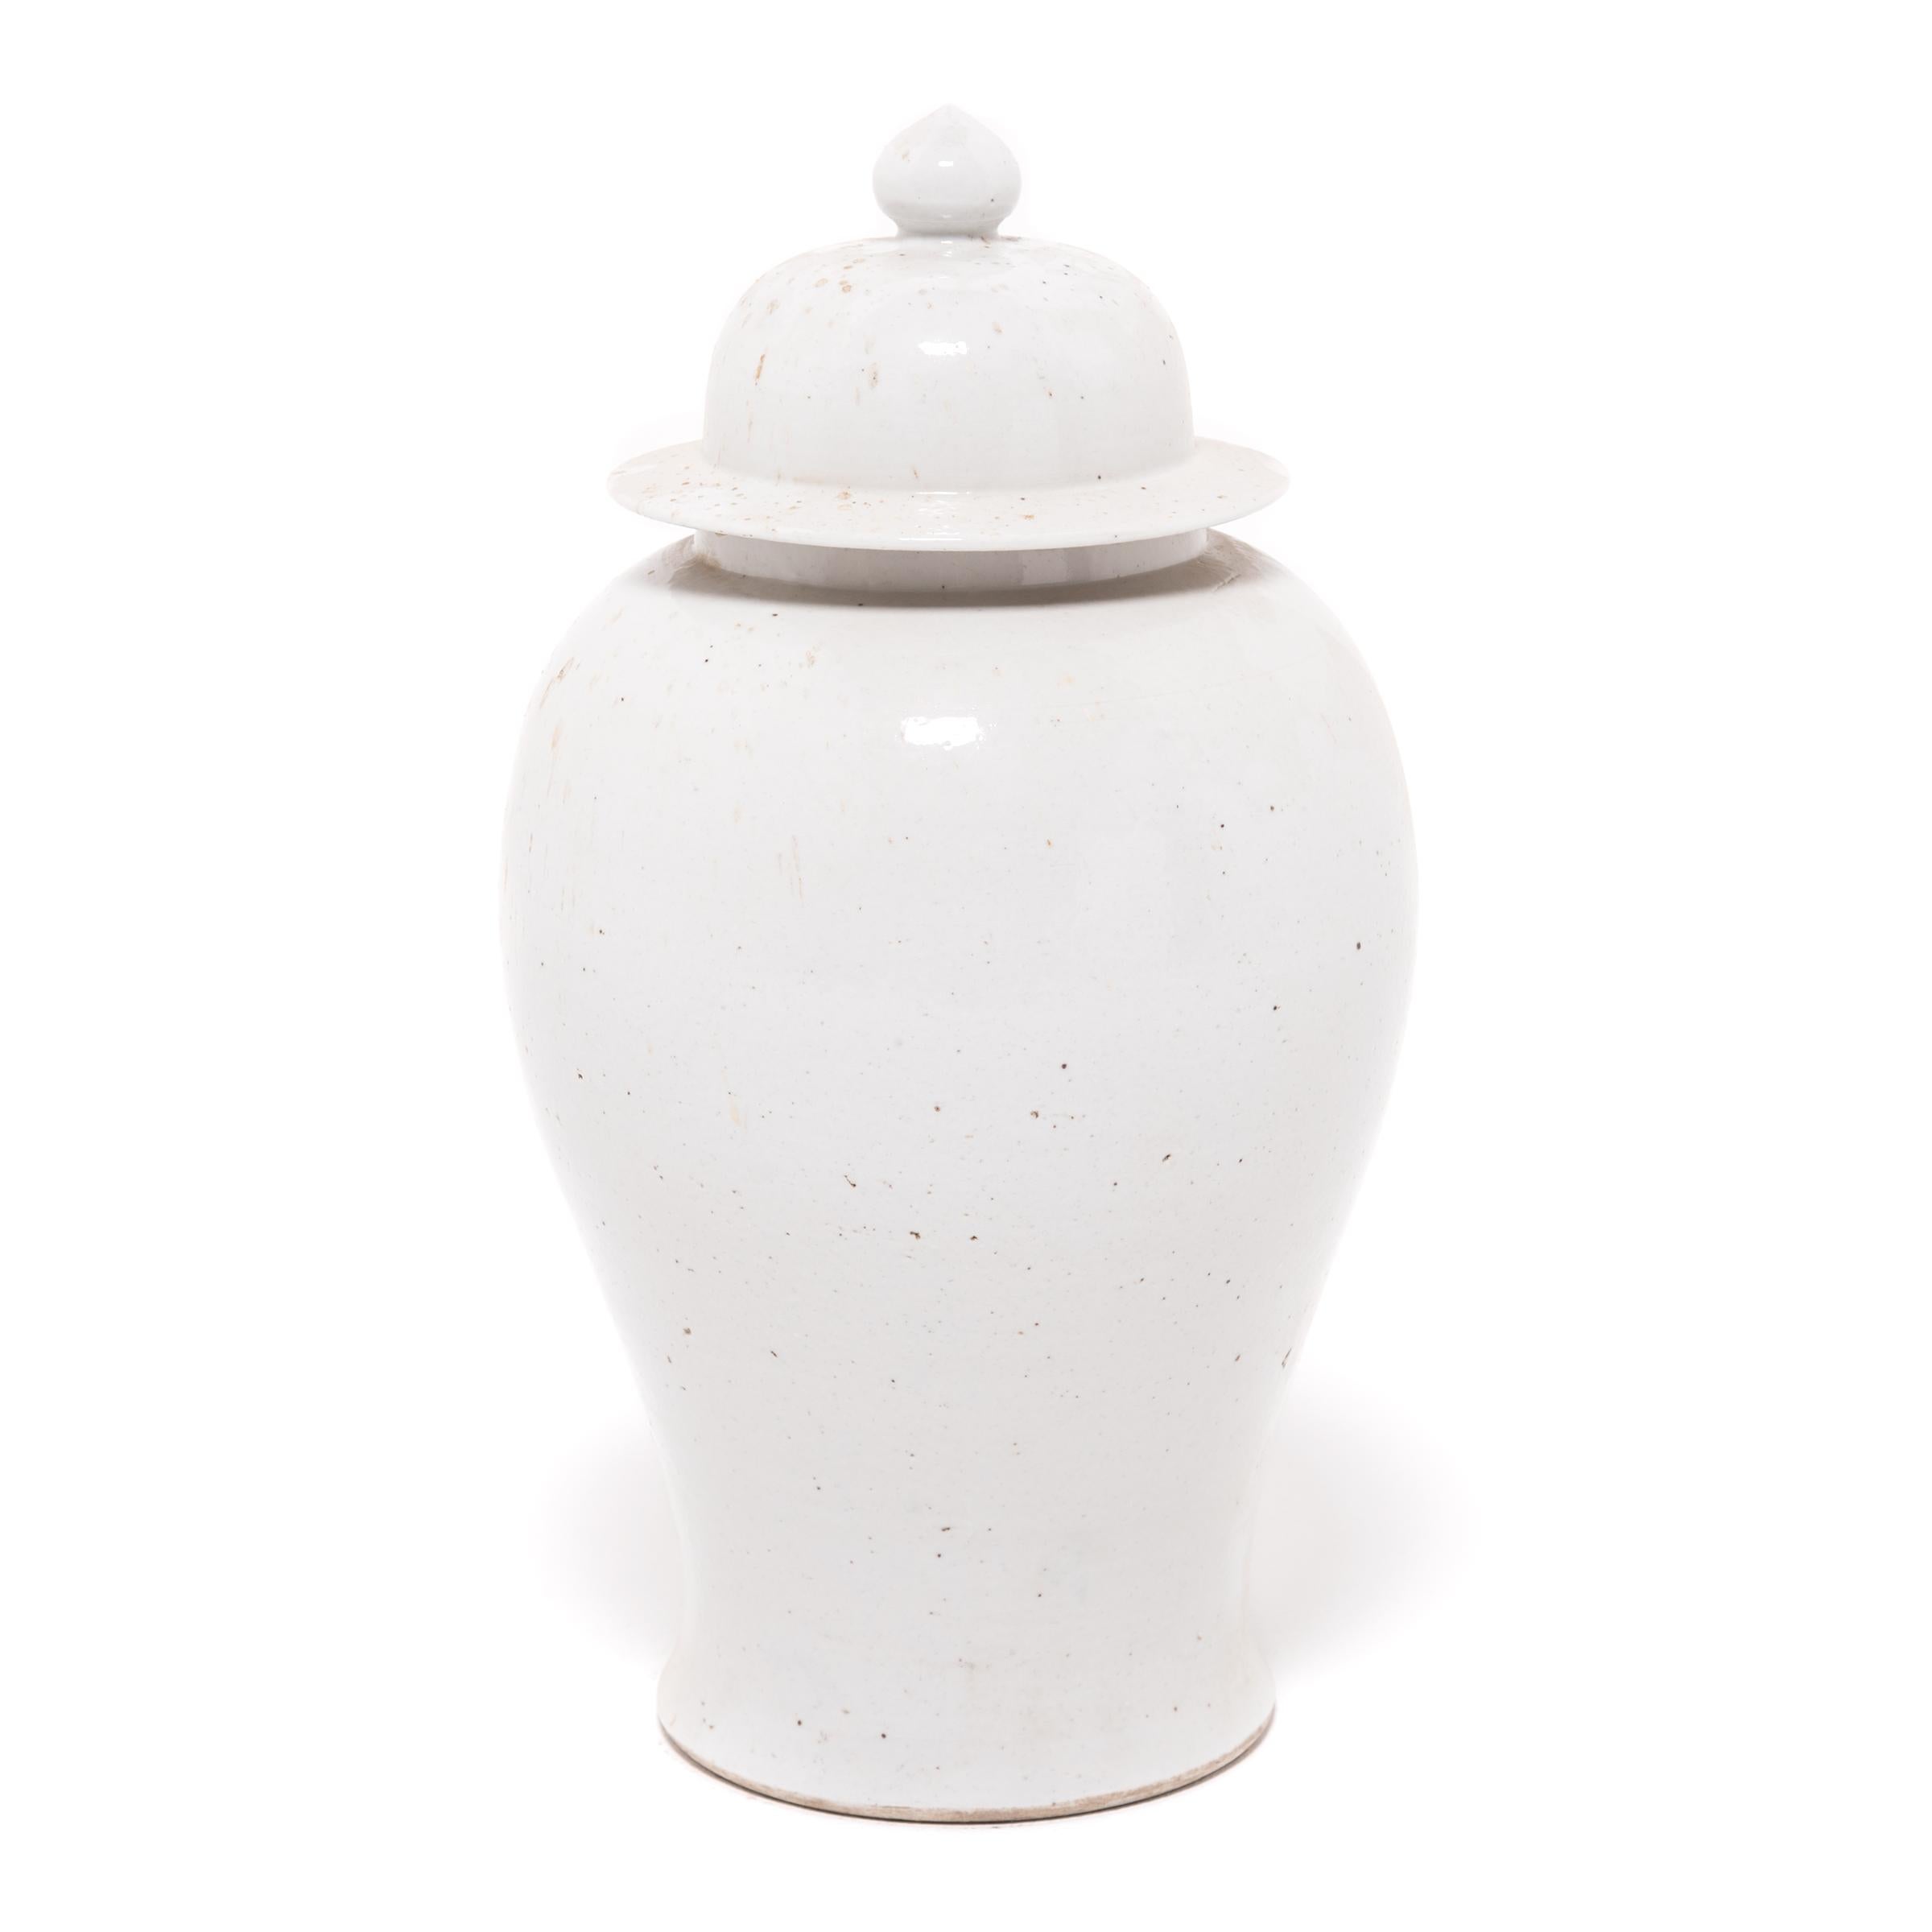 Defined by its rounded body, high shoulders, and domed lid, the time-honored form of the Chinese baluster jar takes on a streamlined look in this contemporary interpretation made in China's Zhejiang province. Traditionally elaborately decorated,